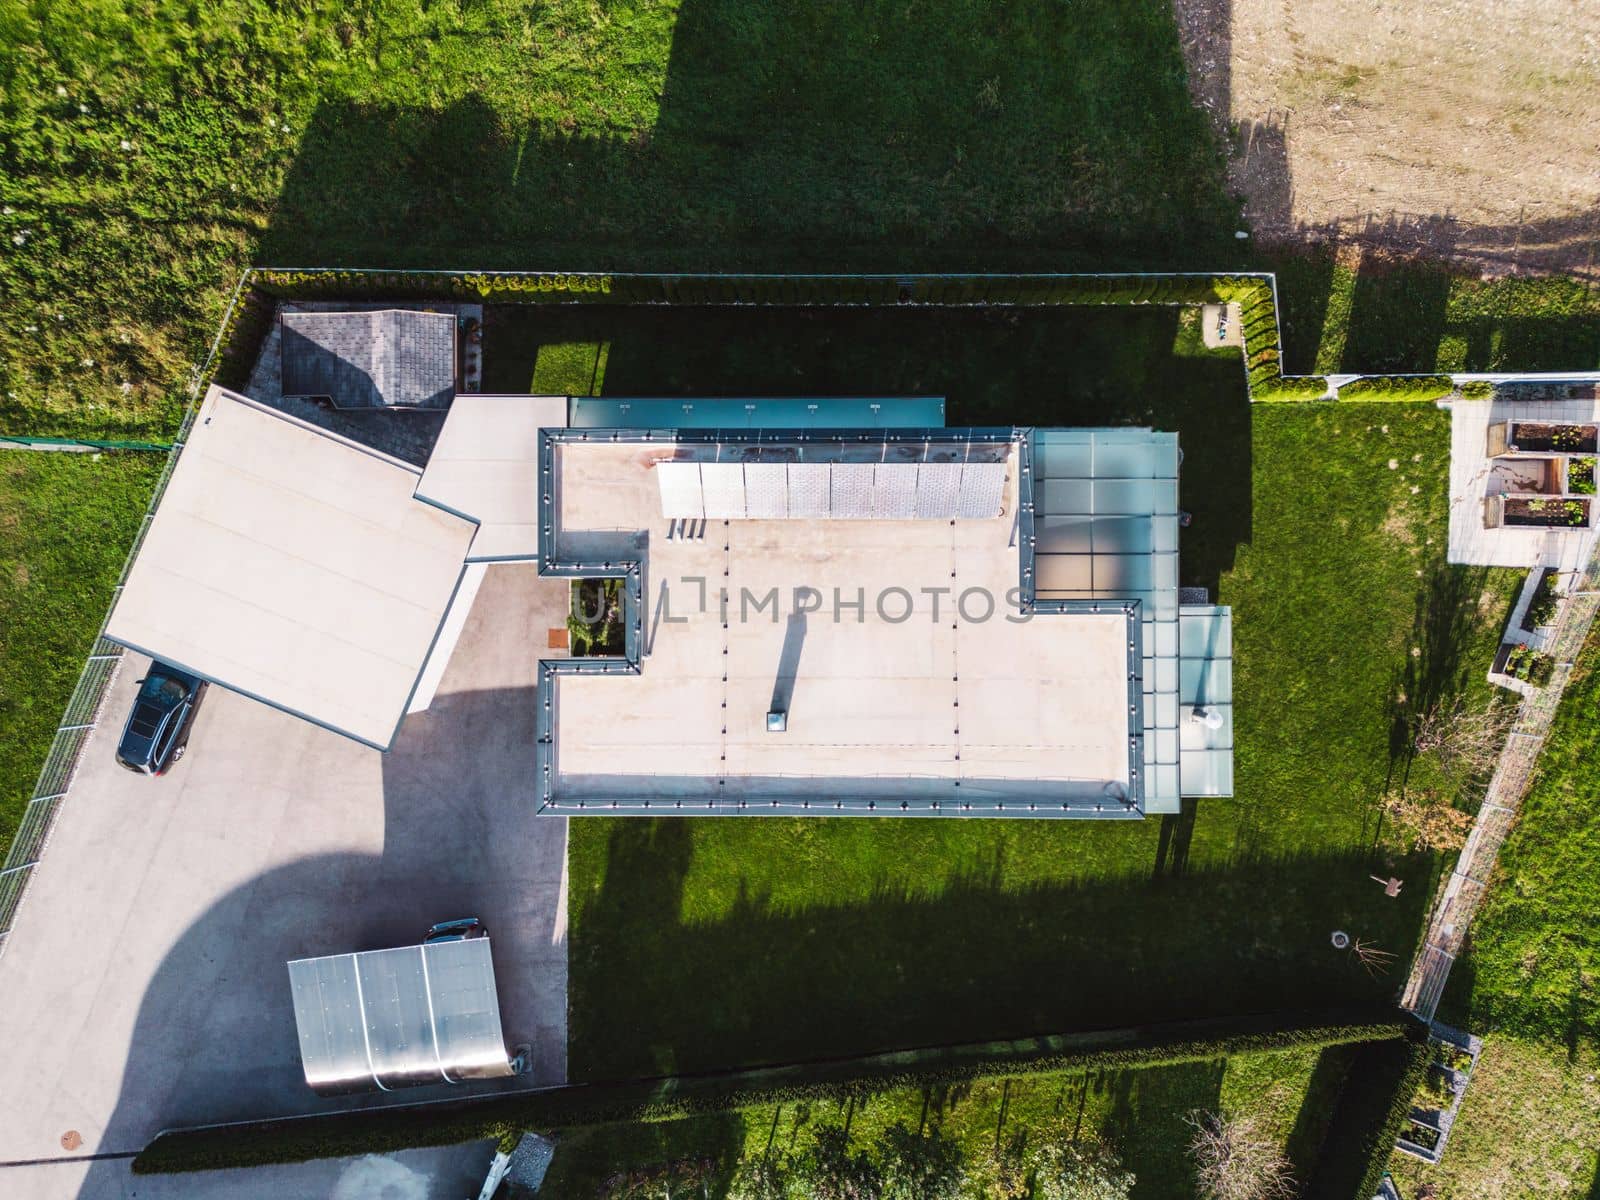 Aerial view of a modern house with solar panels on the roof top. Modern architecture, suburban home, country side living, luxury lifestyle. Renewable energy, solar panels.